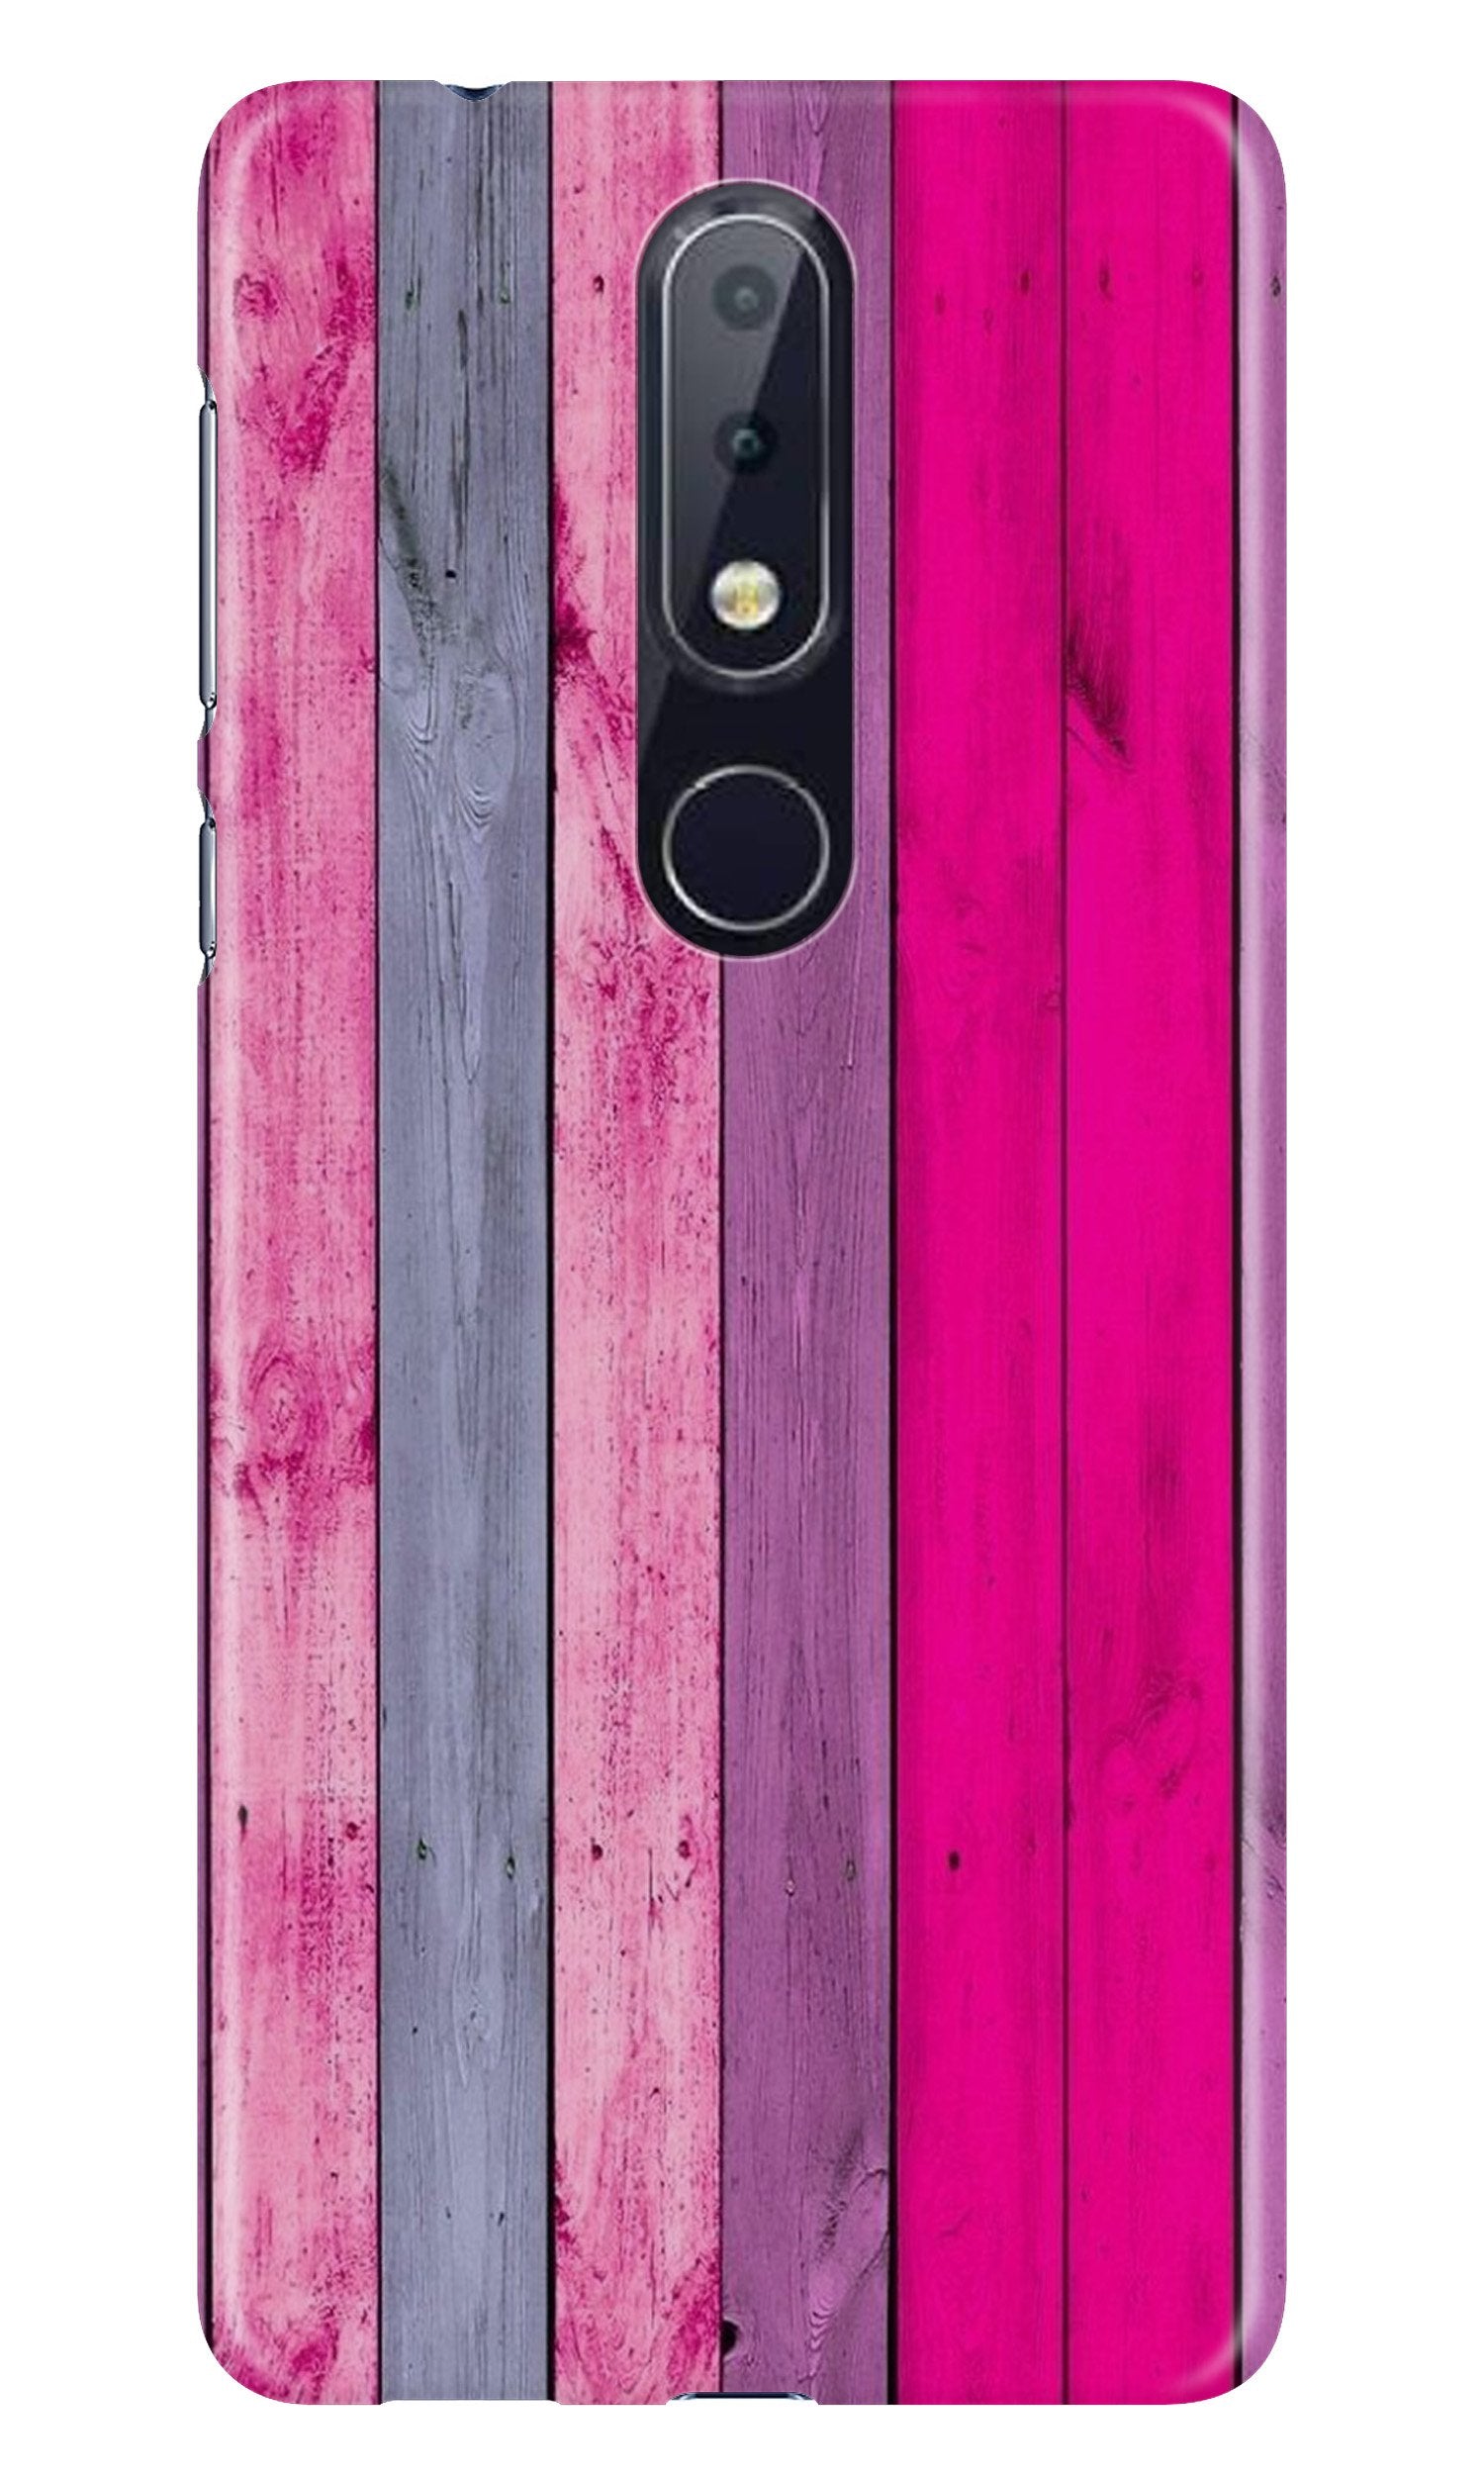 Wooden look Case for Nokia 3.2